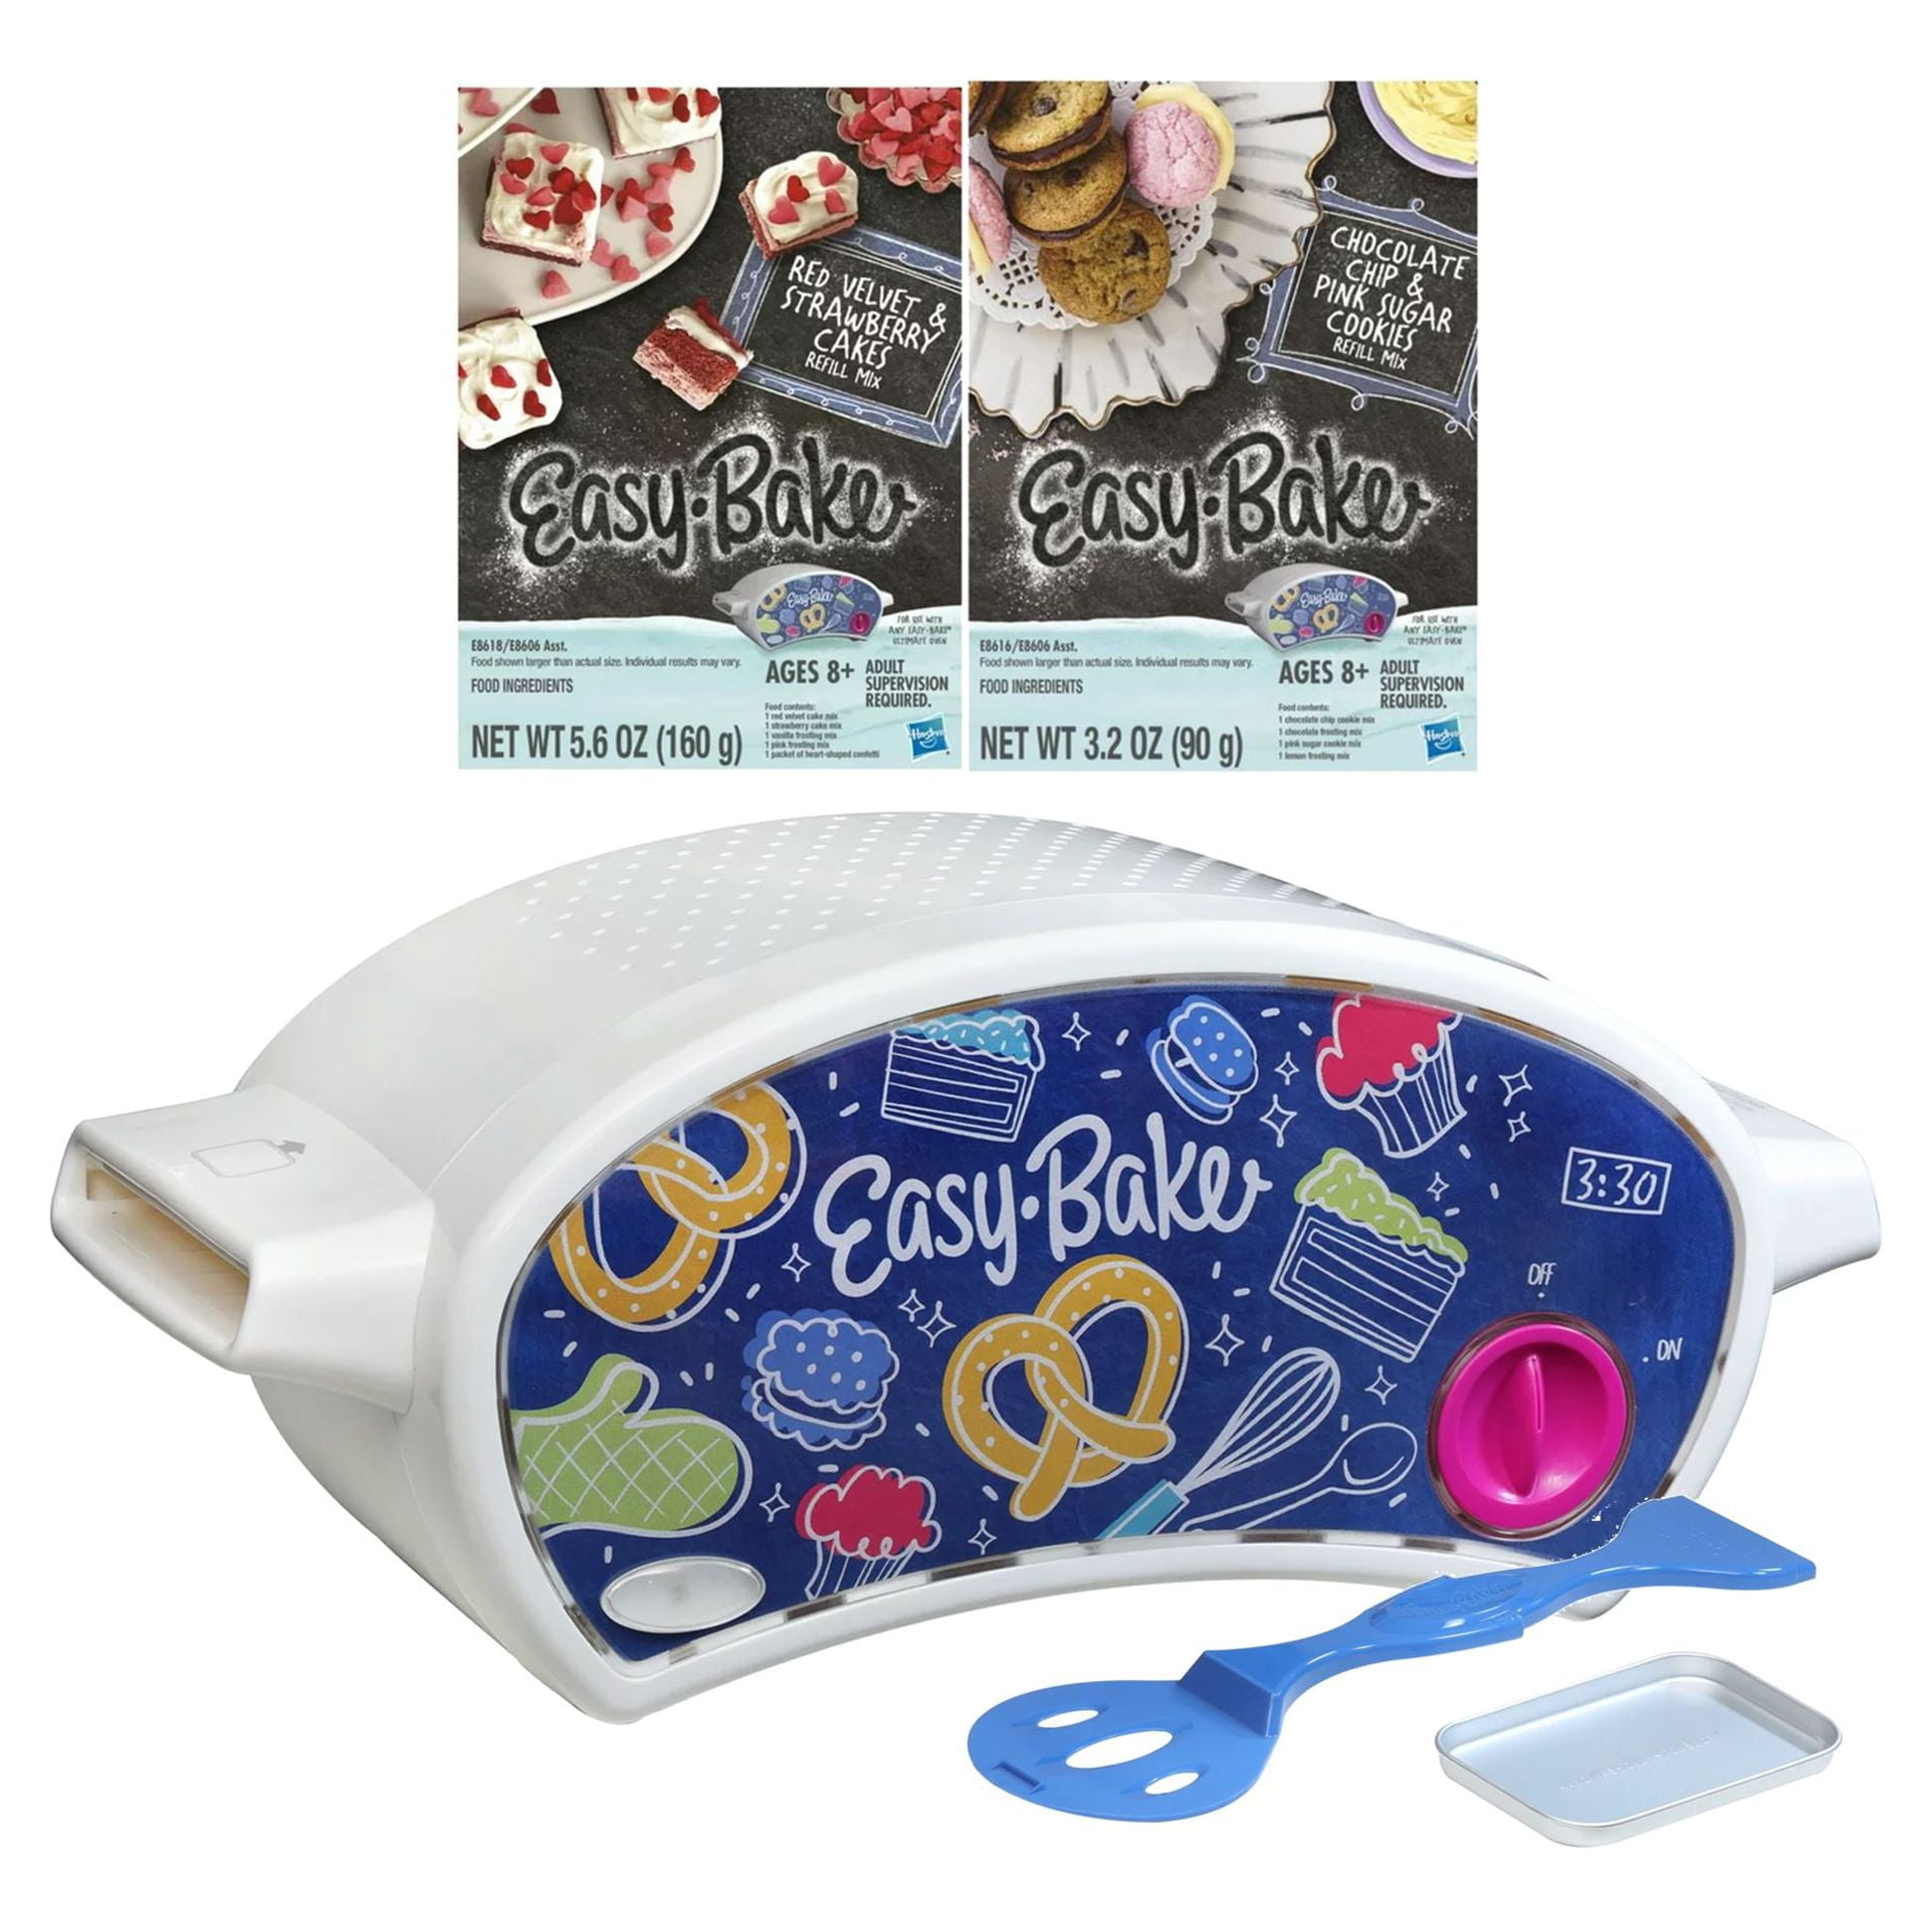 Easy Bake Ultimate Oven Deluxe Gift Set, White. Bundle of Oven and Pizza  and Pretzel Mixes (Bundle of 3 Items) 